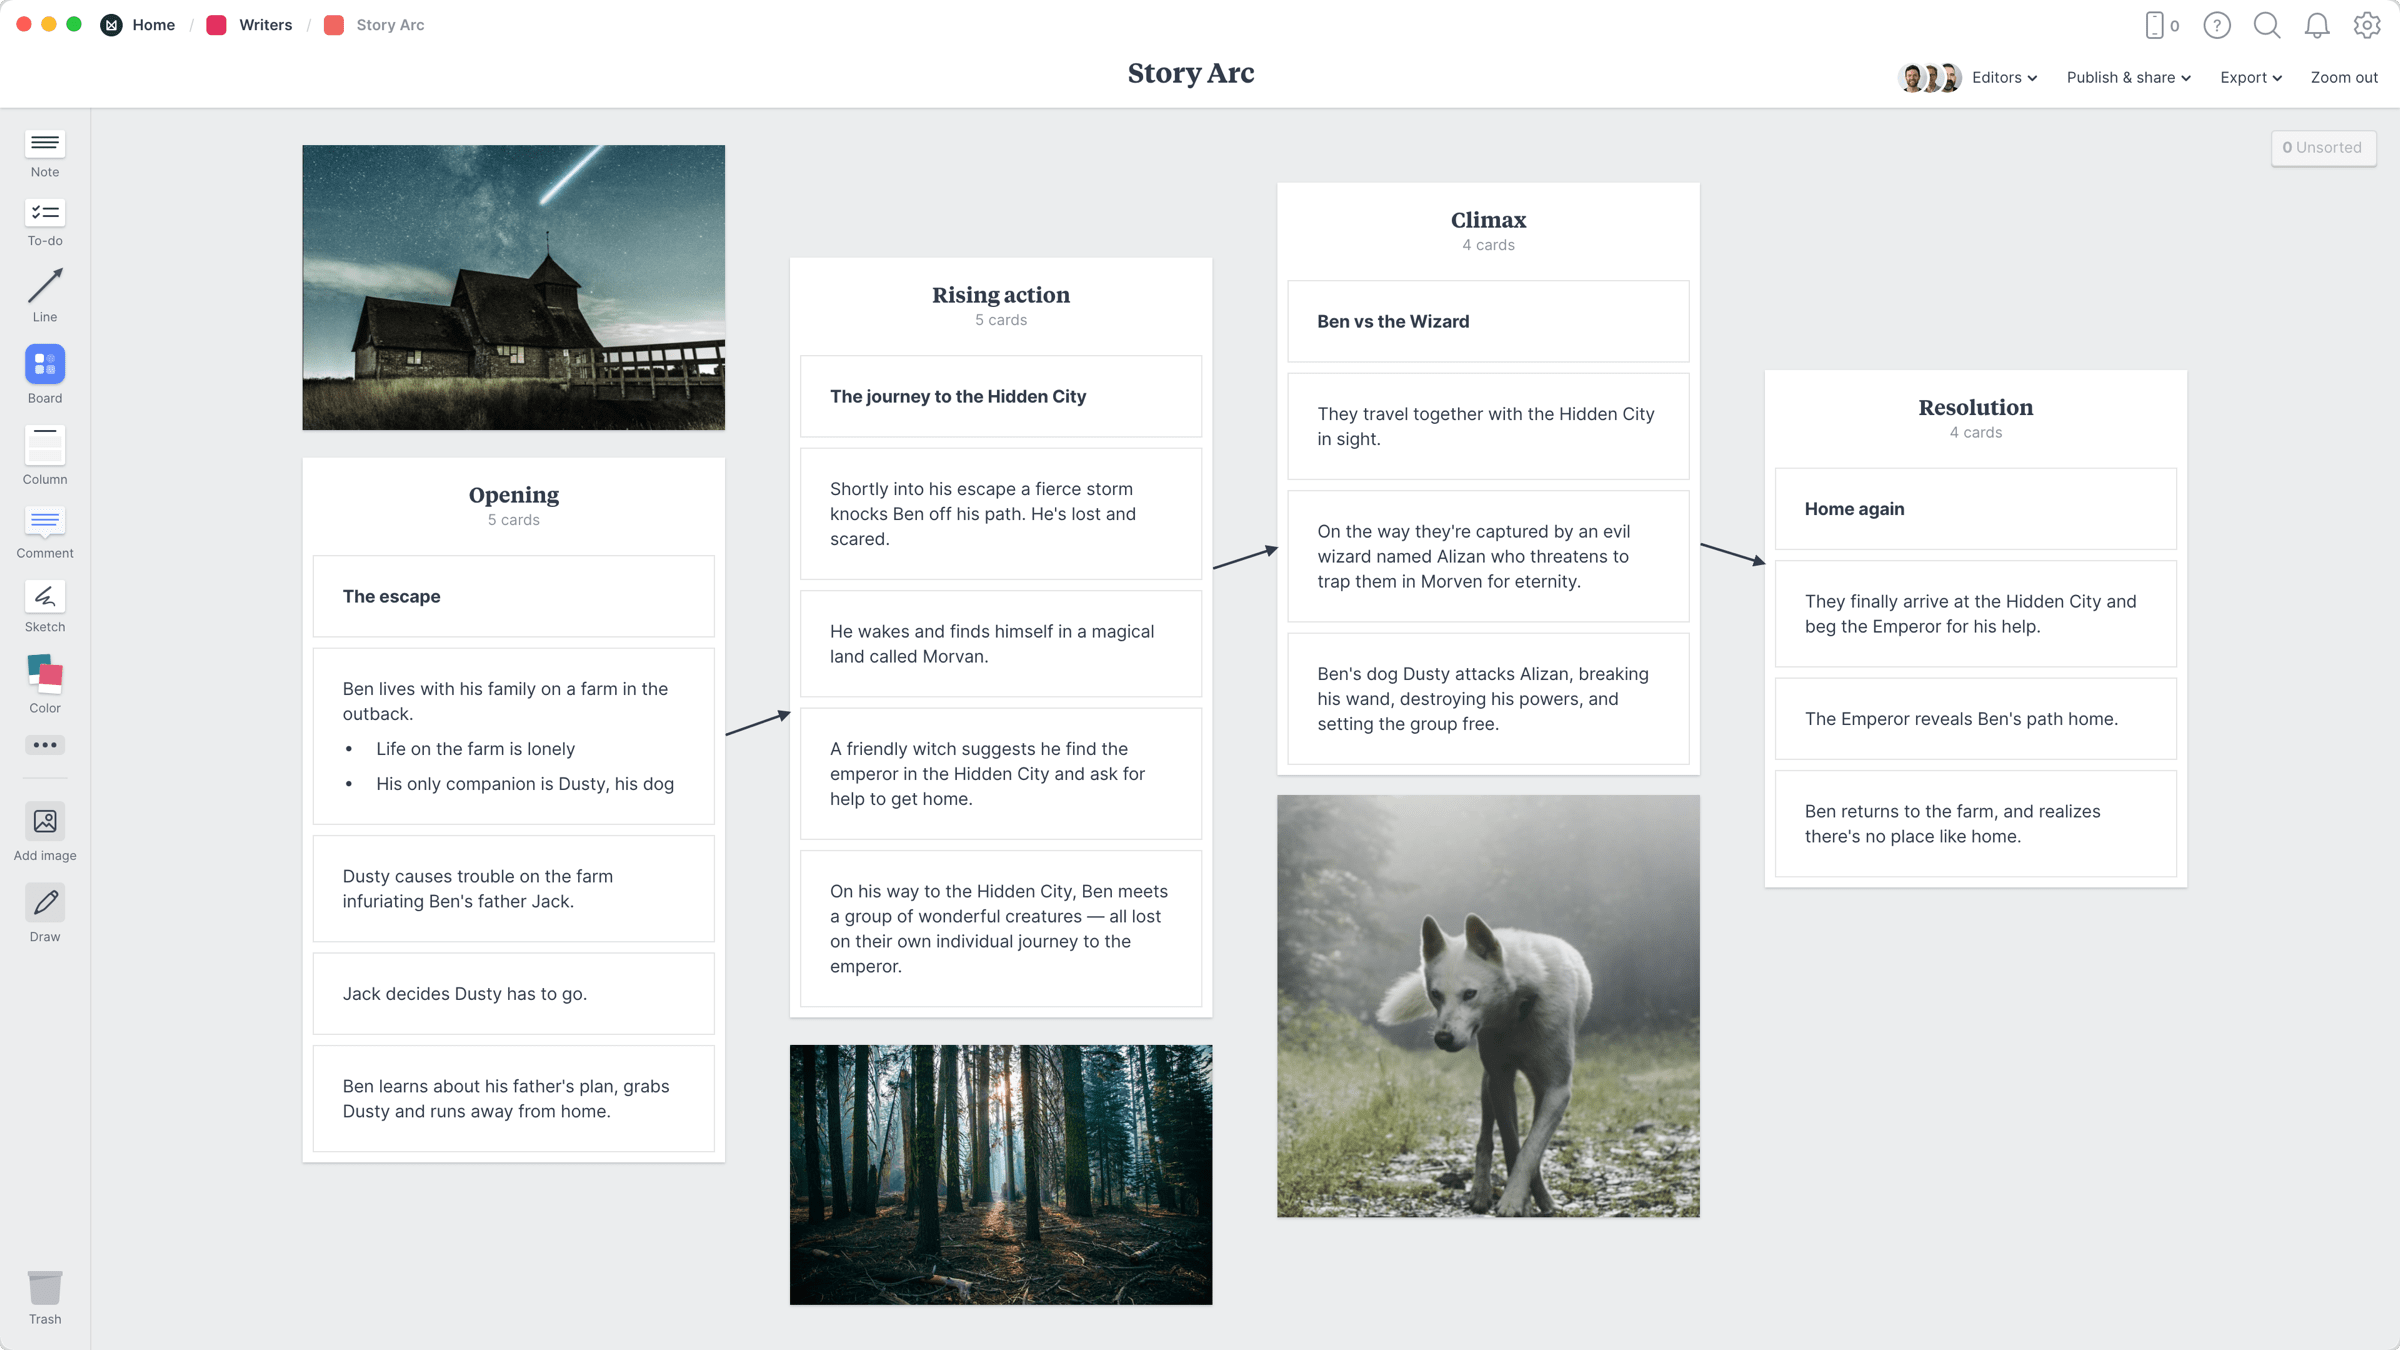 Story Arc Template, within the Milanote app